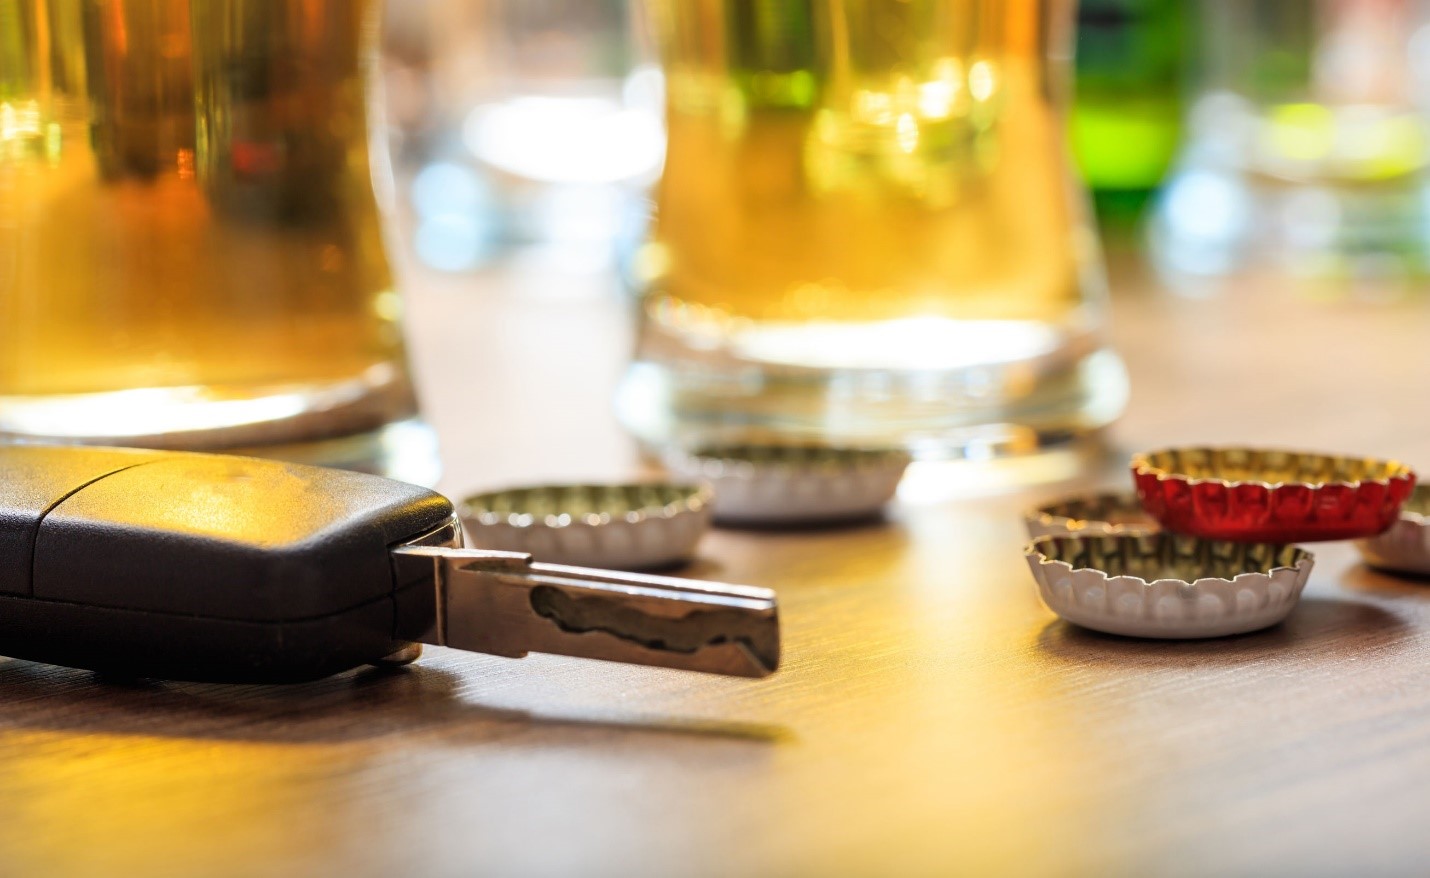 Why More People Drink and Drive During the Christmas Season